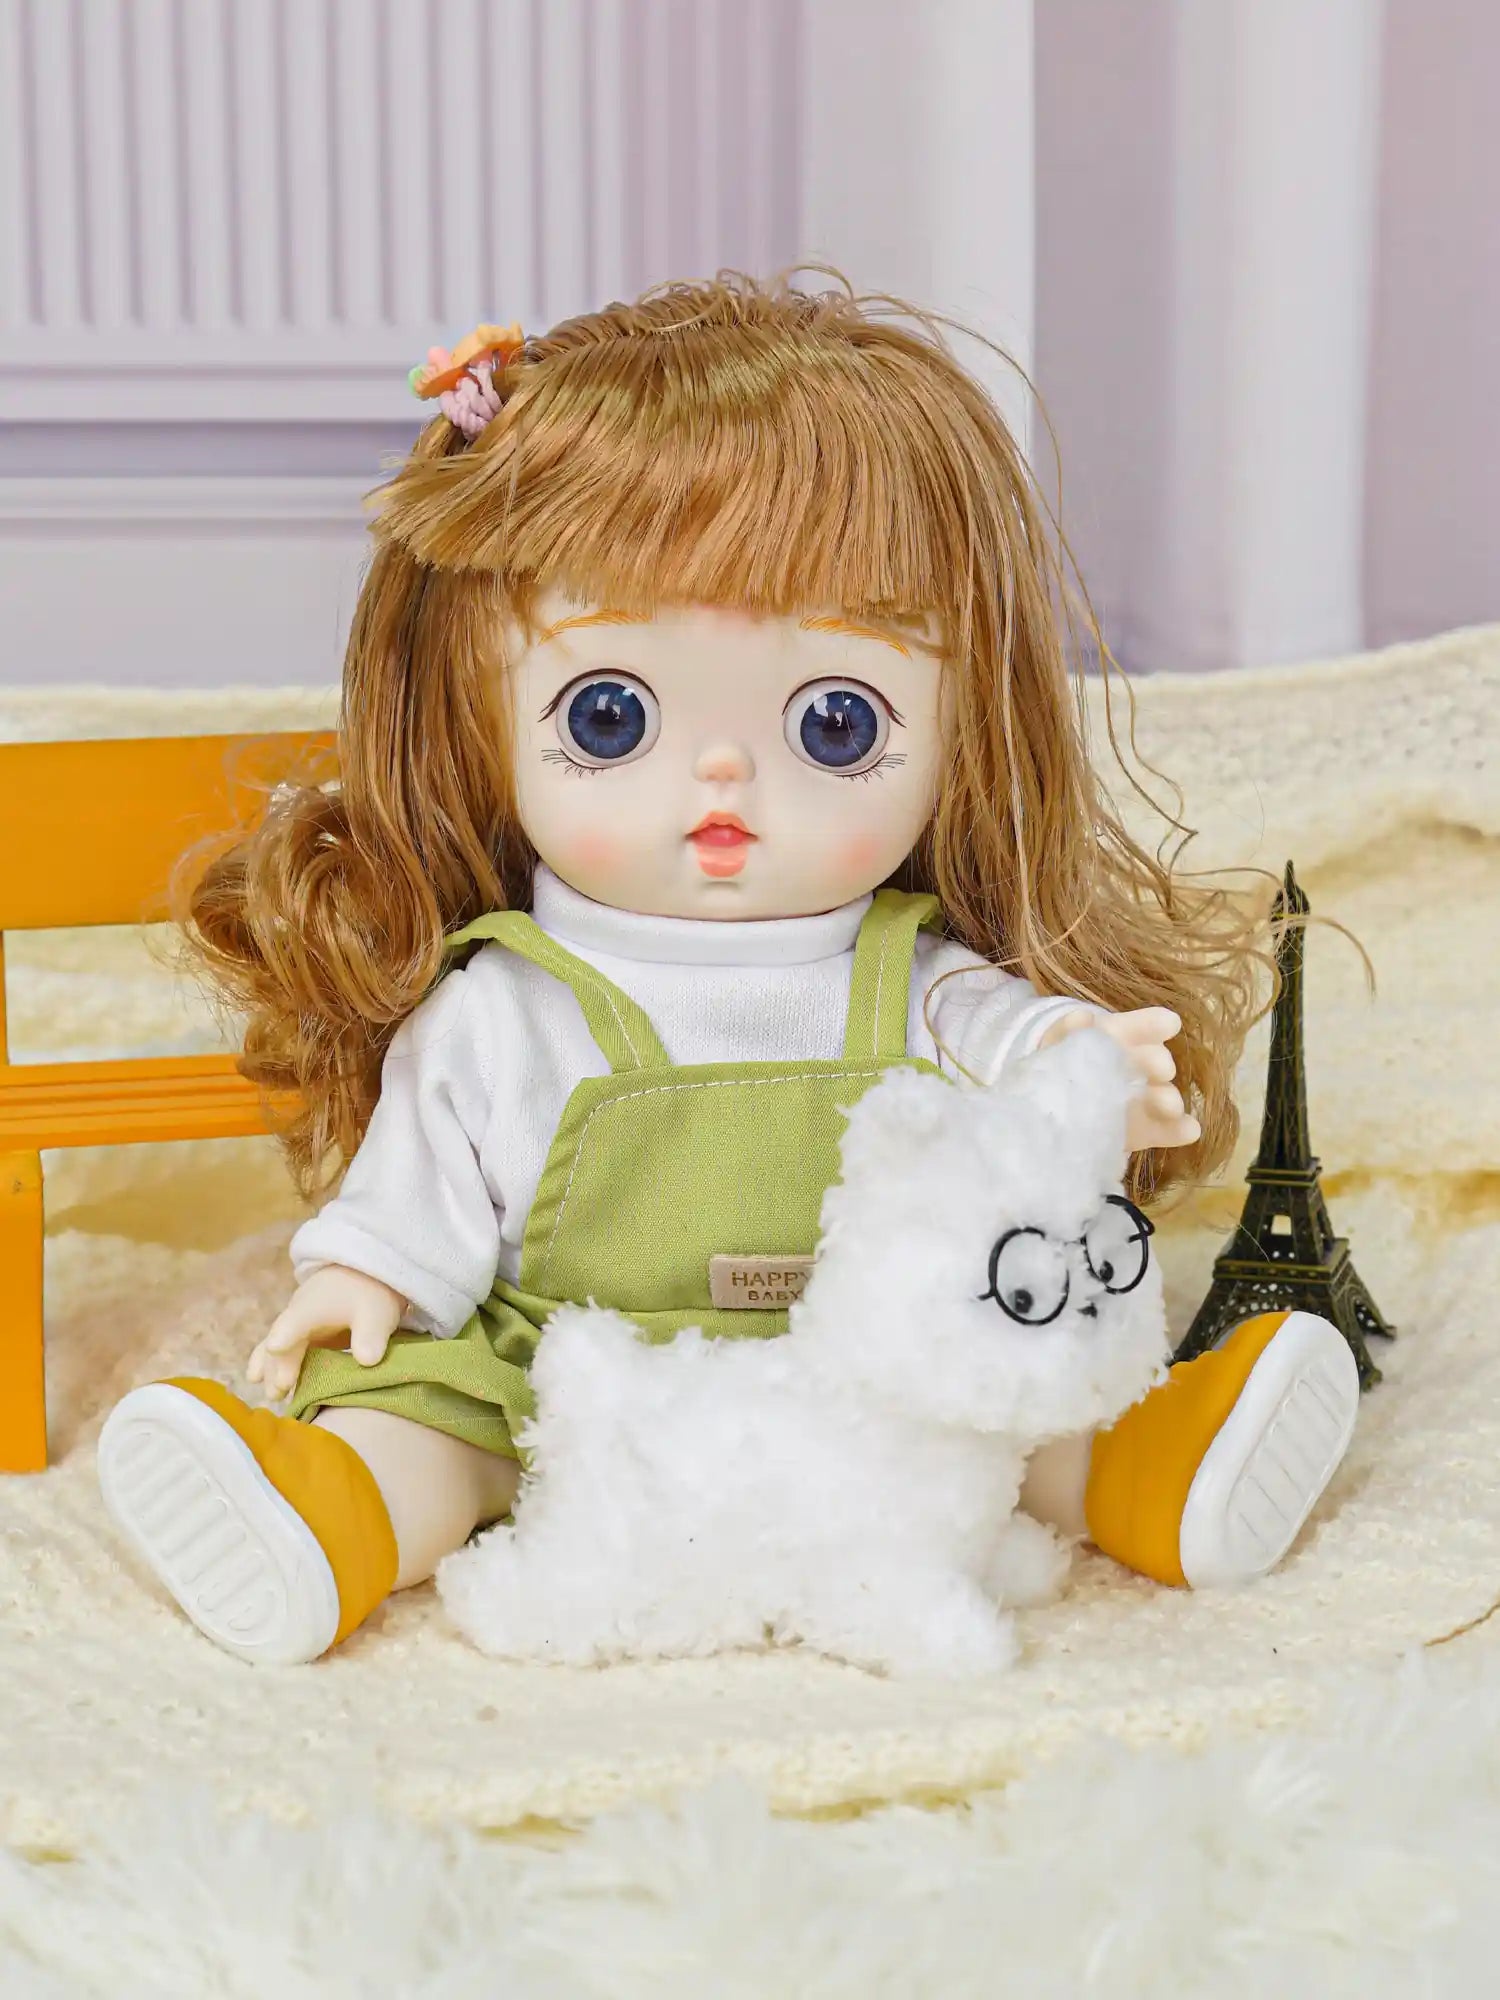 Child's play doll in a playful stance wearing overalls labeled "HAPPY BABY," with a whimsical fuzzy toy.